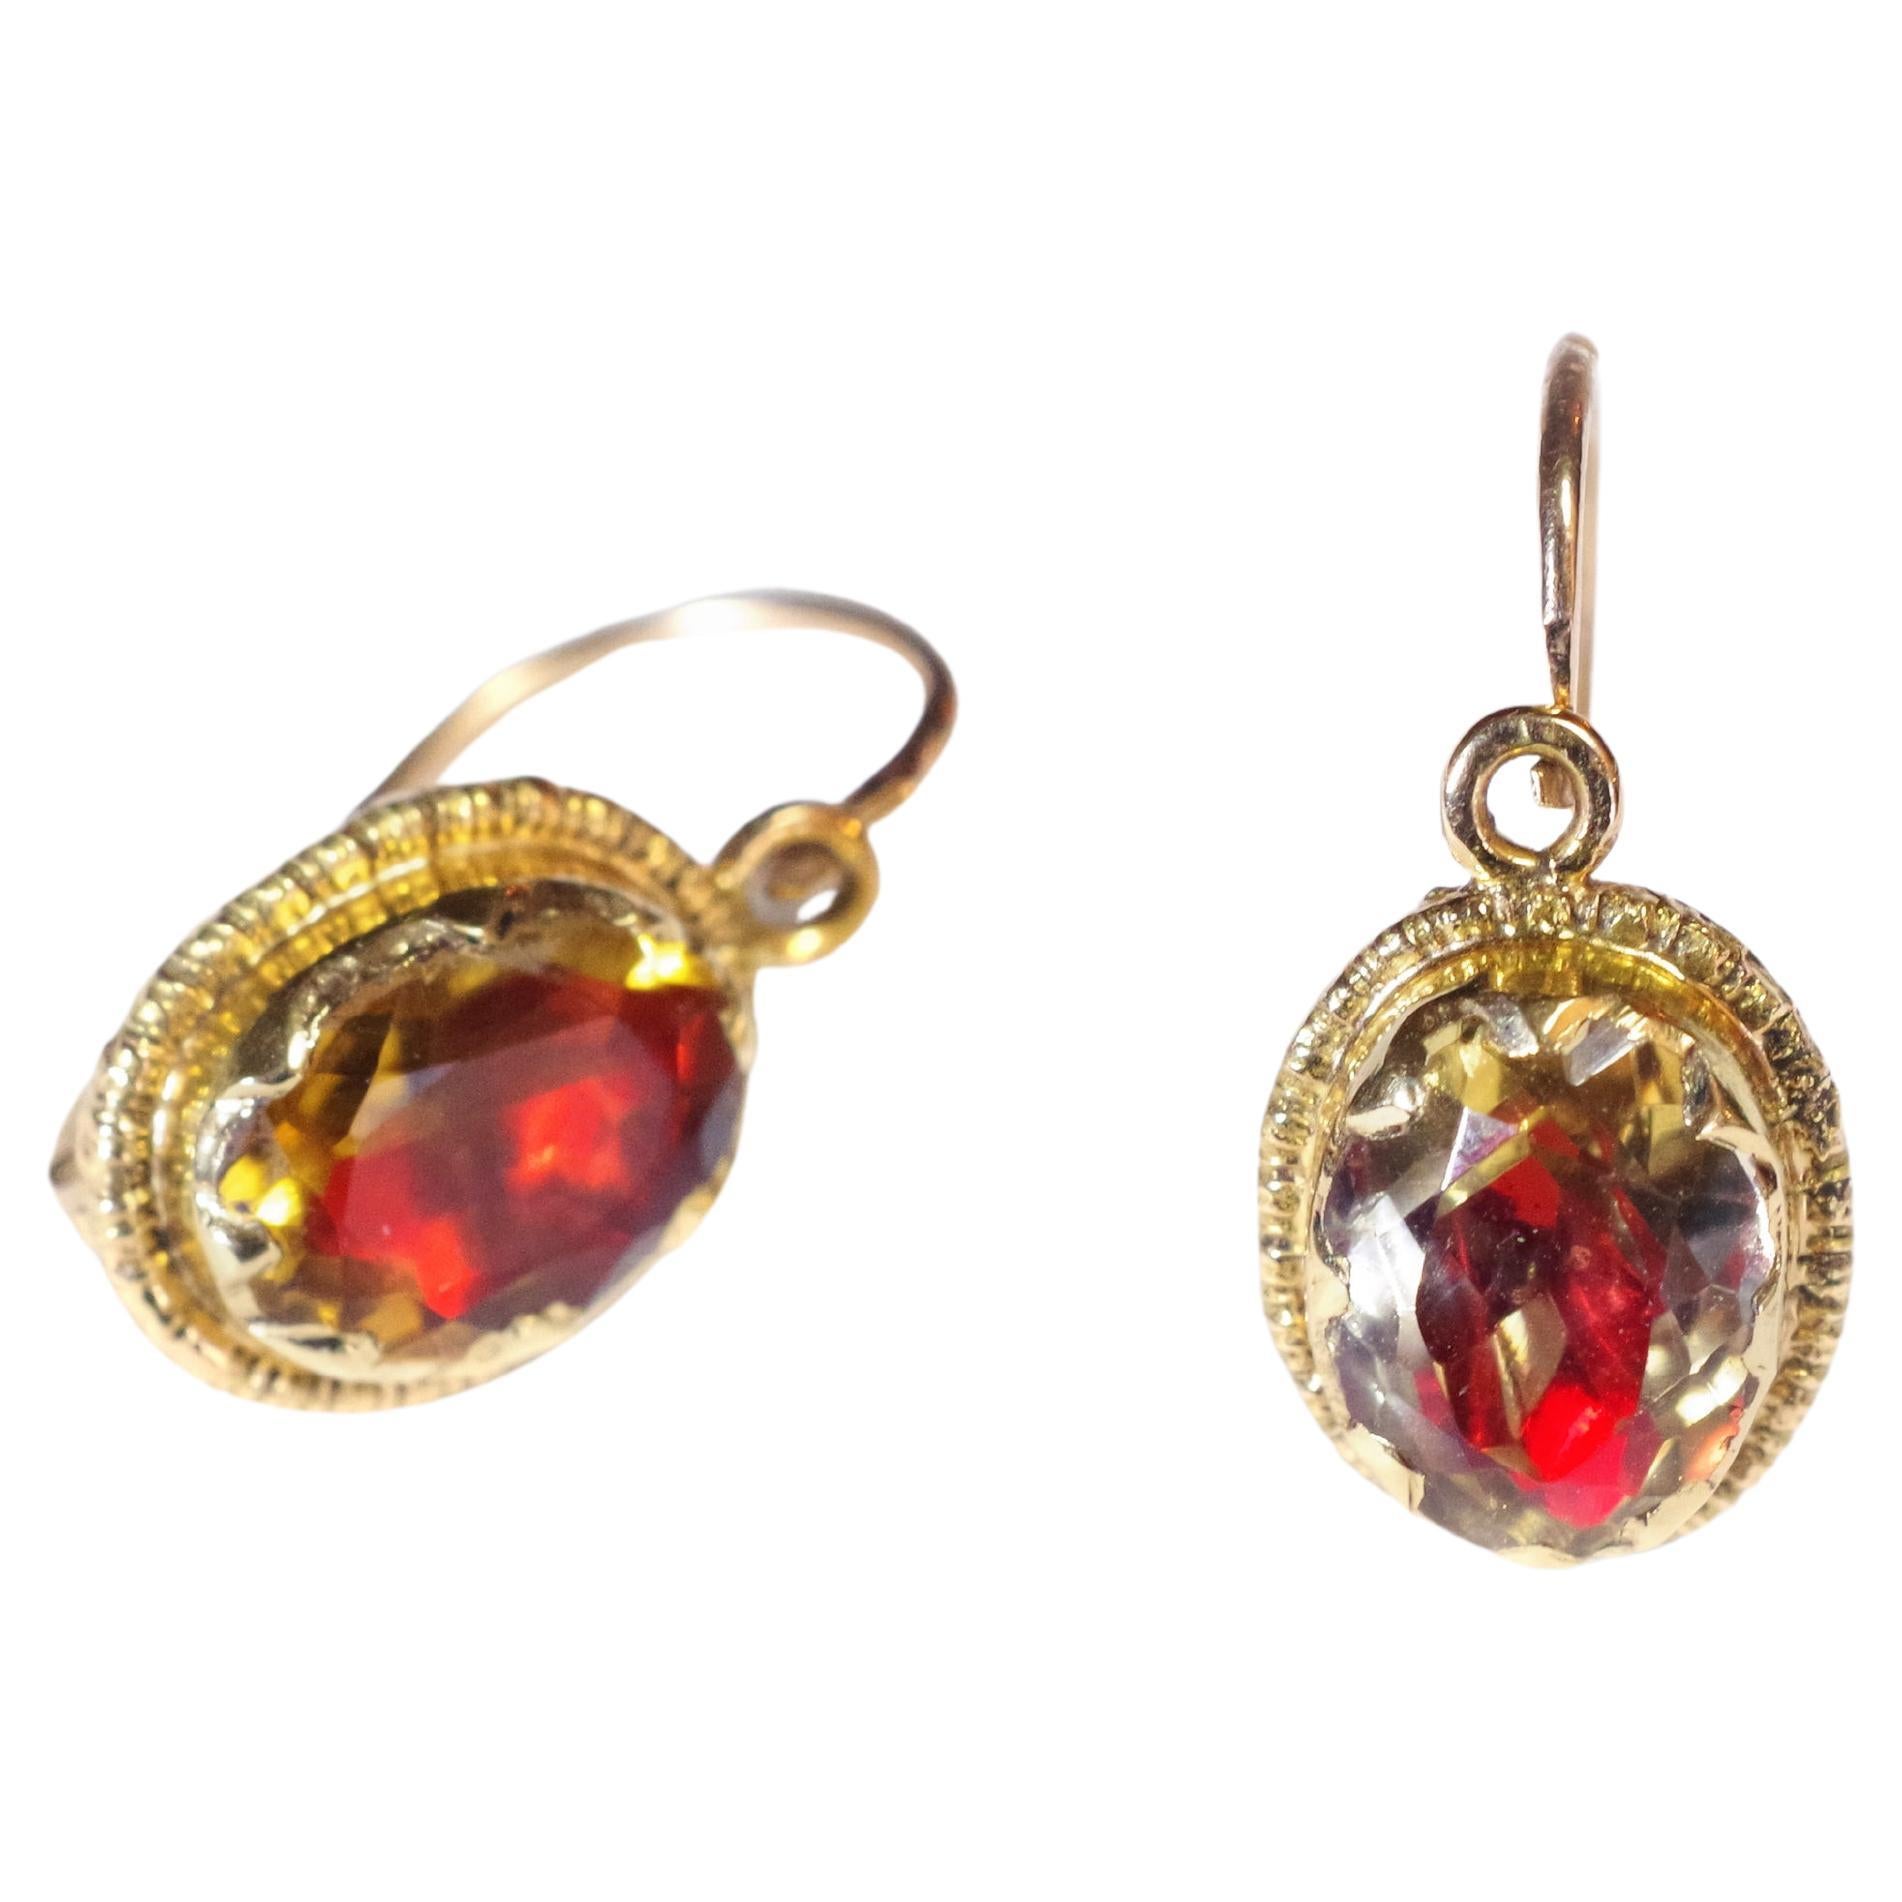 French Regional Citrine Earrings in Gold, Catalan Earrings, Foiled Citrine, Perp For Sale